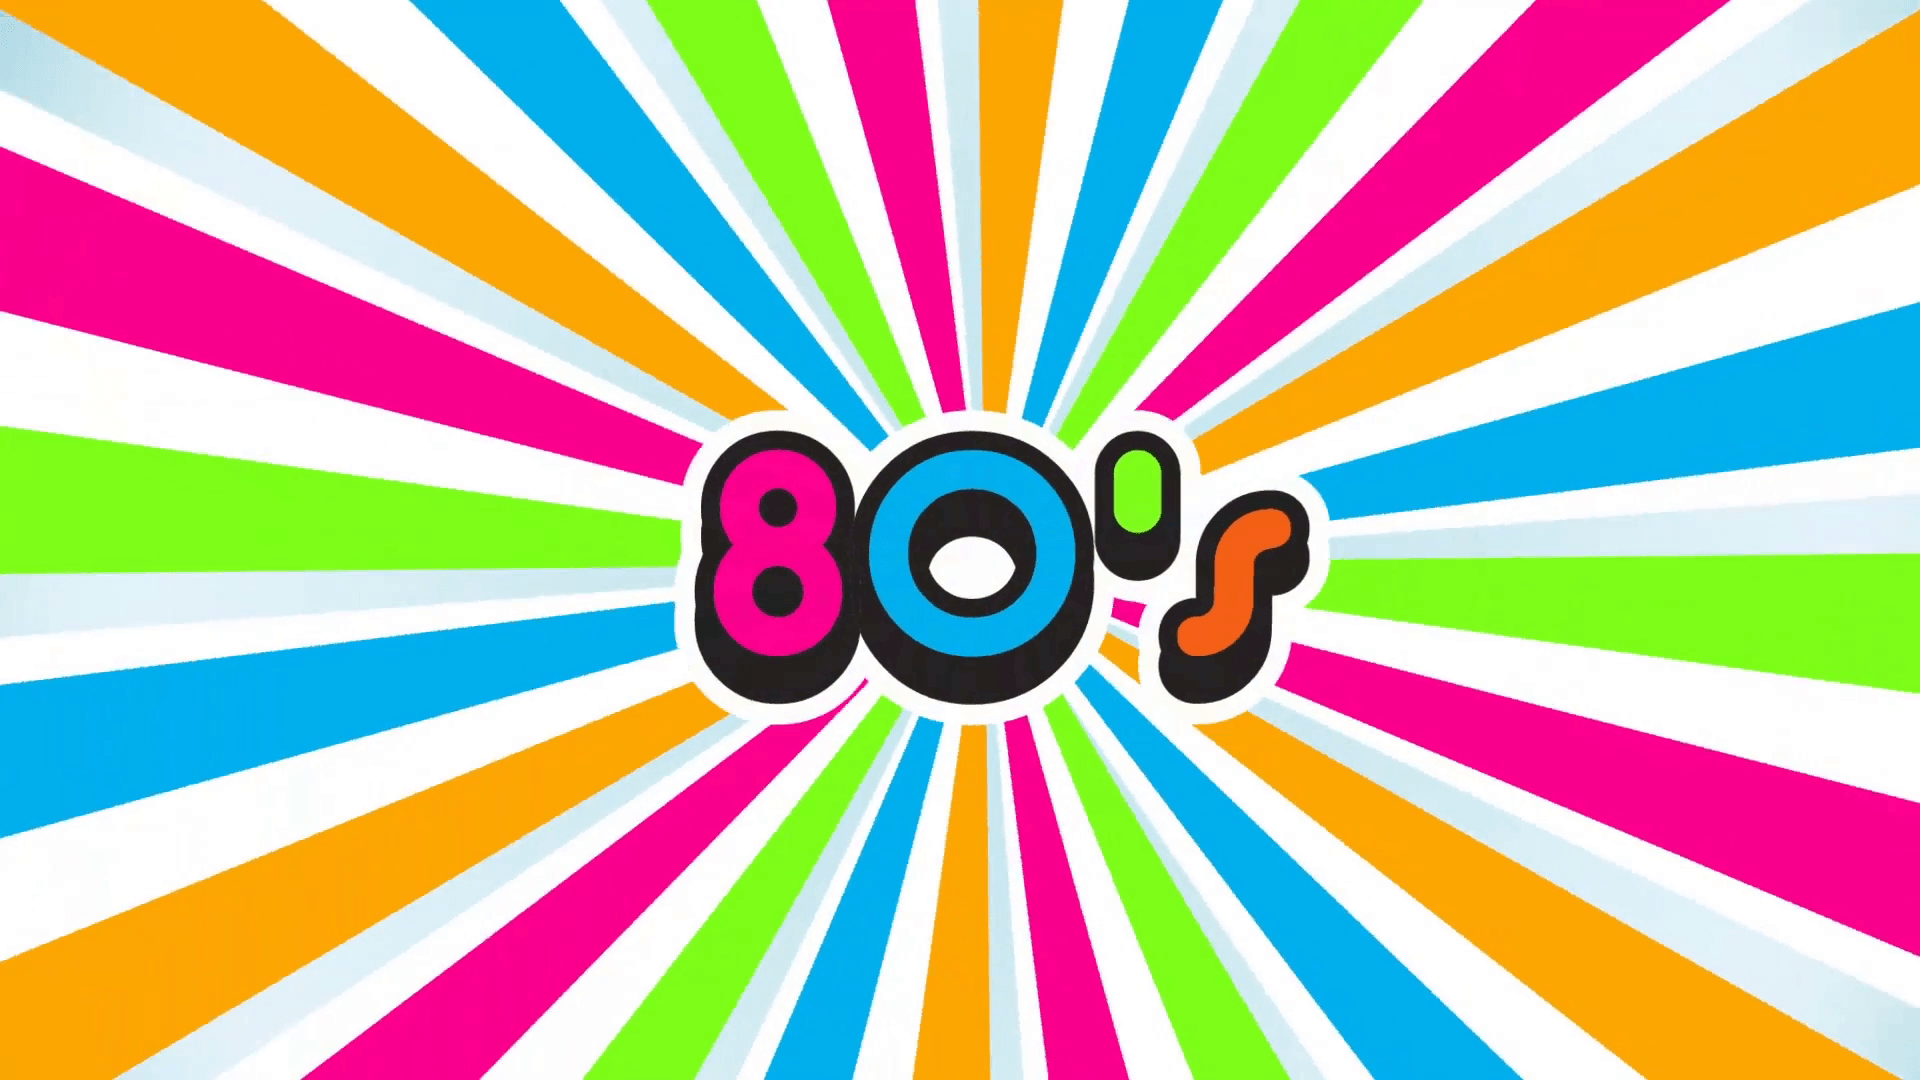 38 Best 80s Background Images Free Complete Backgroun - vrogue.co